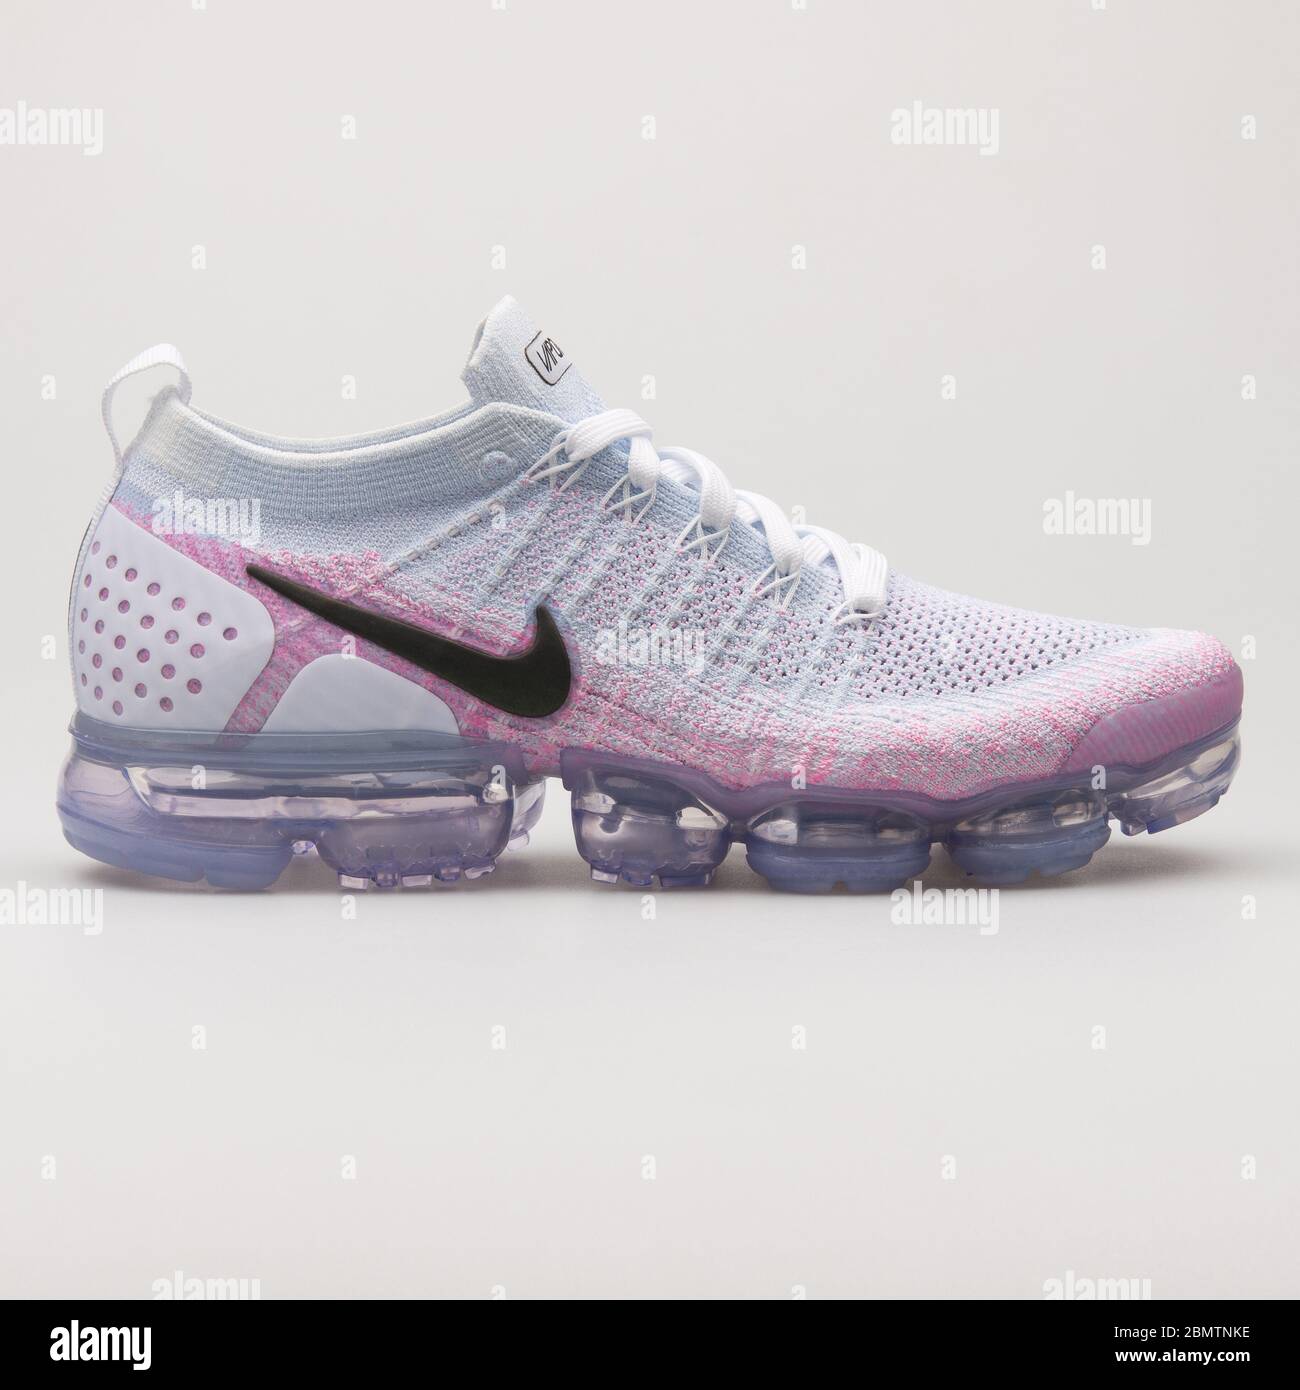 VIENNA, AUSTRIA - FEBRUARY 19, 2018: Nike Air Vapormax Flyknit 2 white, pink  and blue sneaker on white background Stock Photo - Alamy